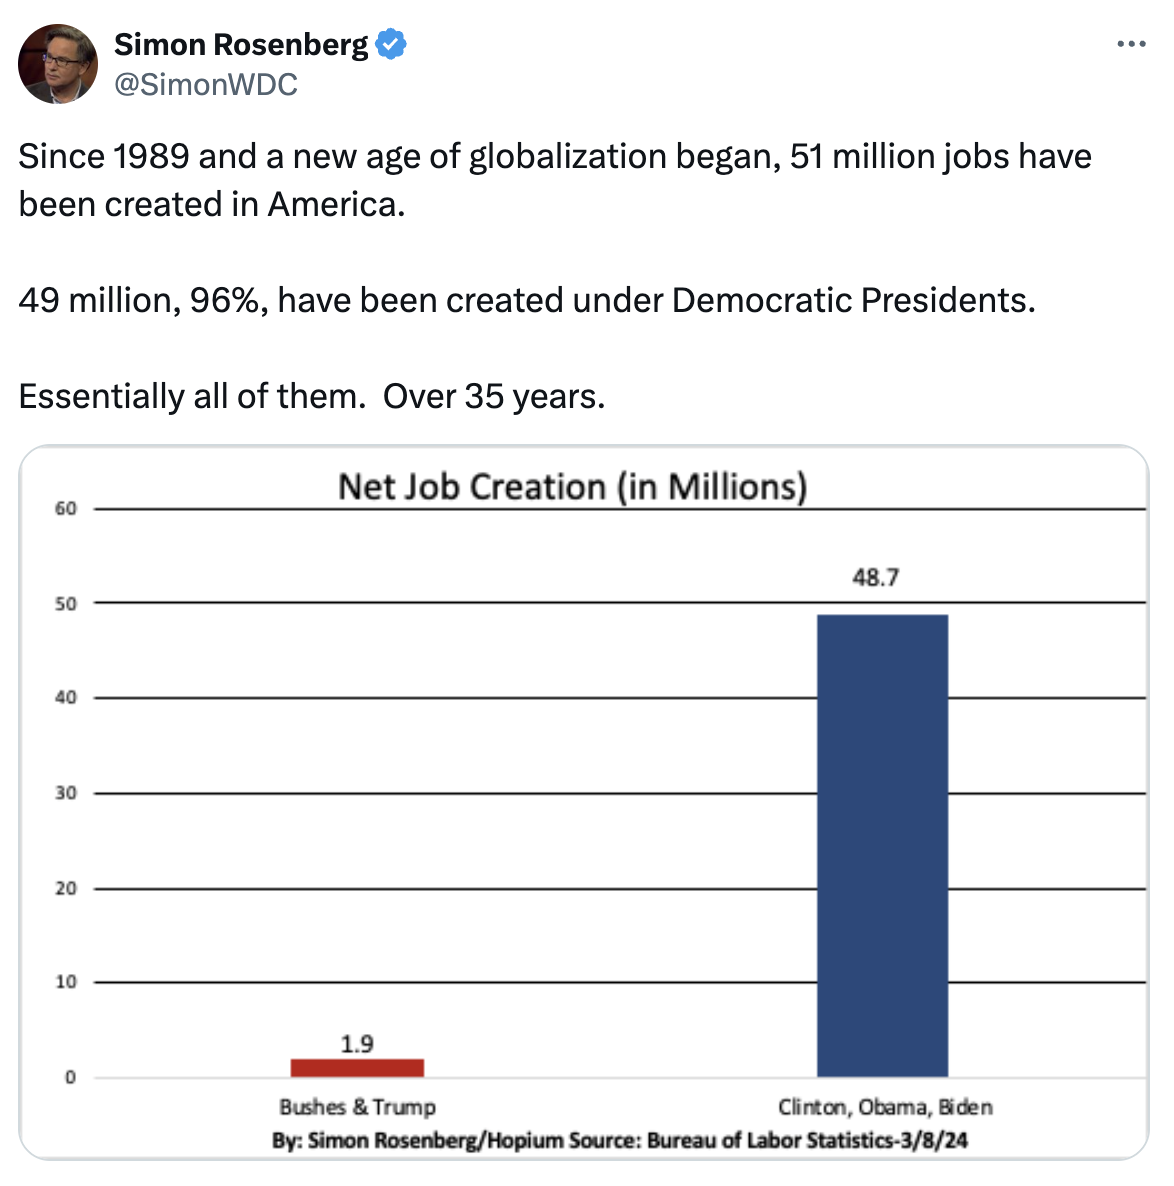 Tweet Screenshot: Simon Rosenberg, @SimonWDC: Since 1989 and a new age of globalization began, 51 million jobs have been created in America. 49 million, 96%, have been created under Democratic Presidents. Essentially all of them. Over 35 years. Graph showing that Democratic Presidents have overseen a net job creation of 48.7 million compared to Republican Presidents overseeing 1.9 million